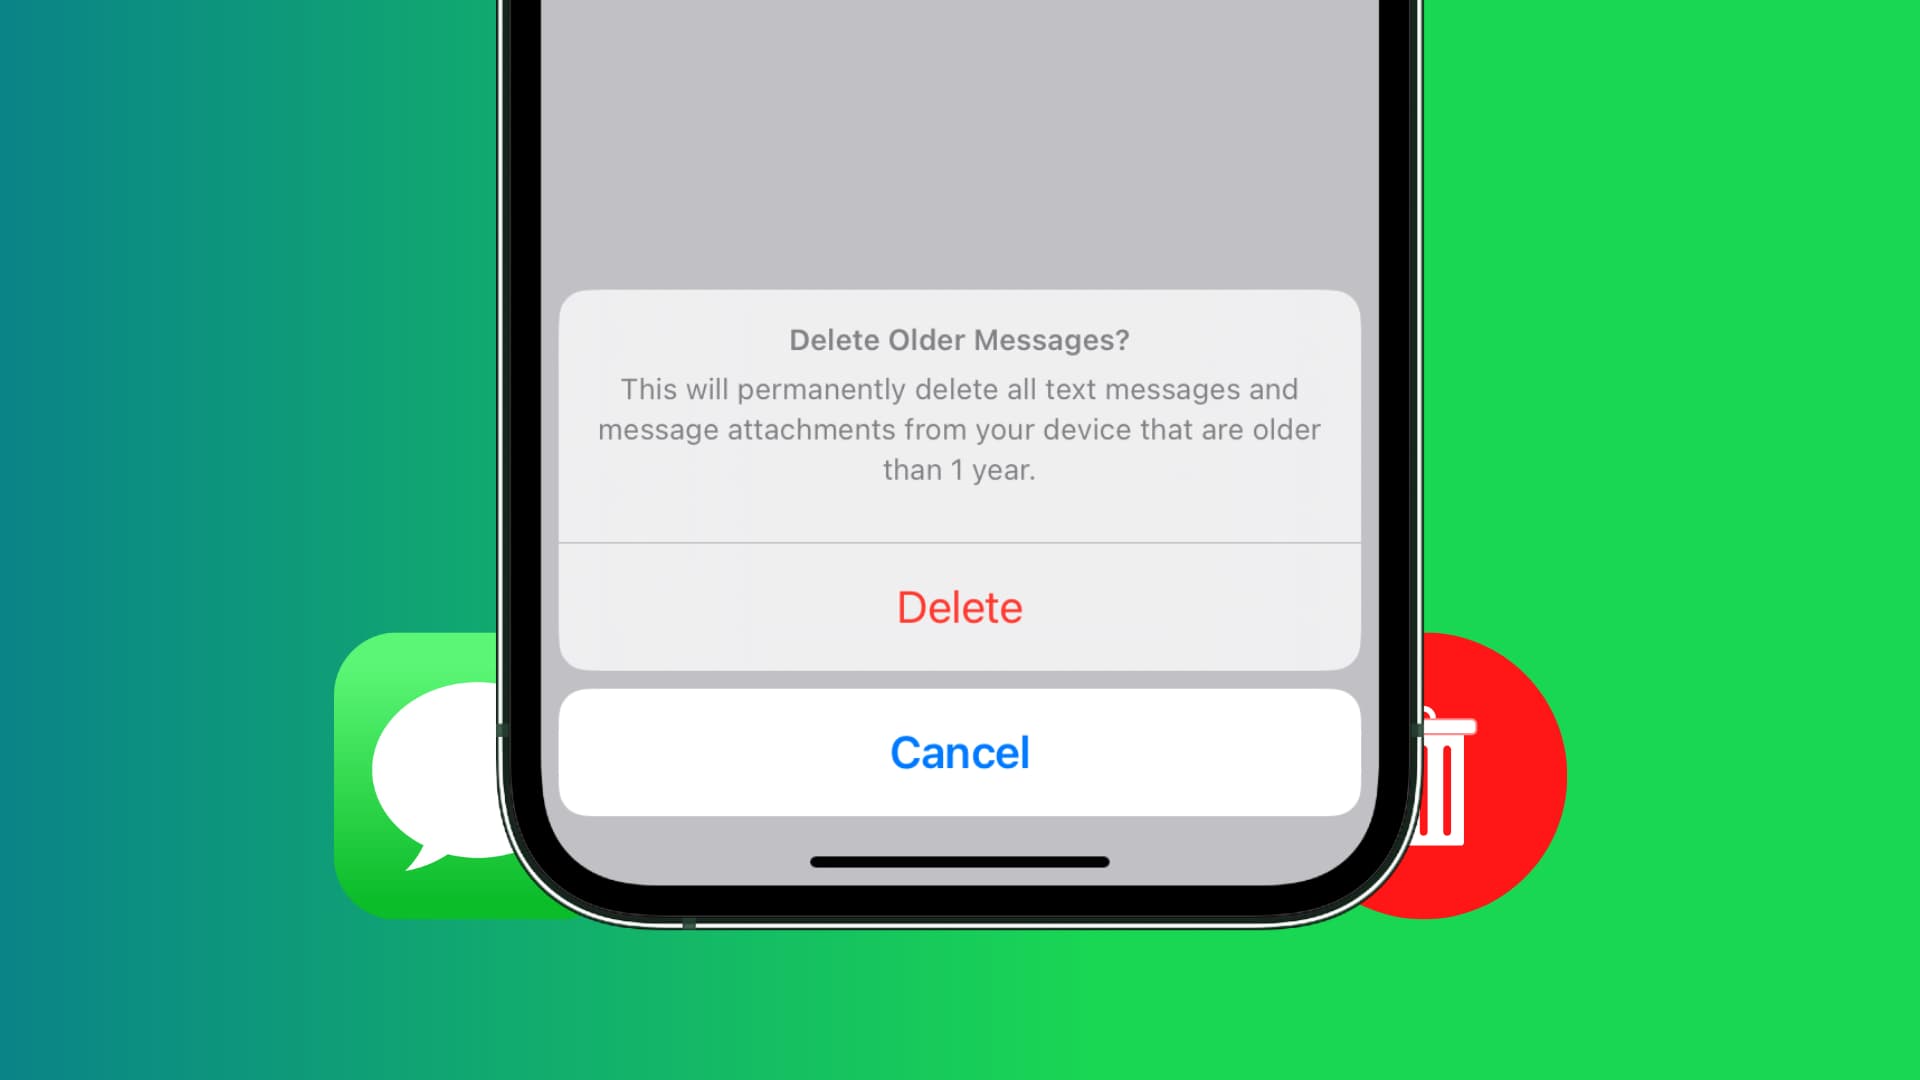 Automatically delete older messages on iPhone